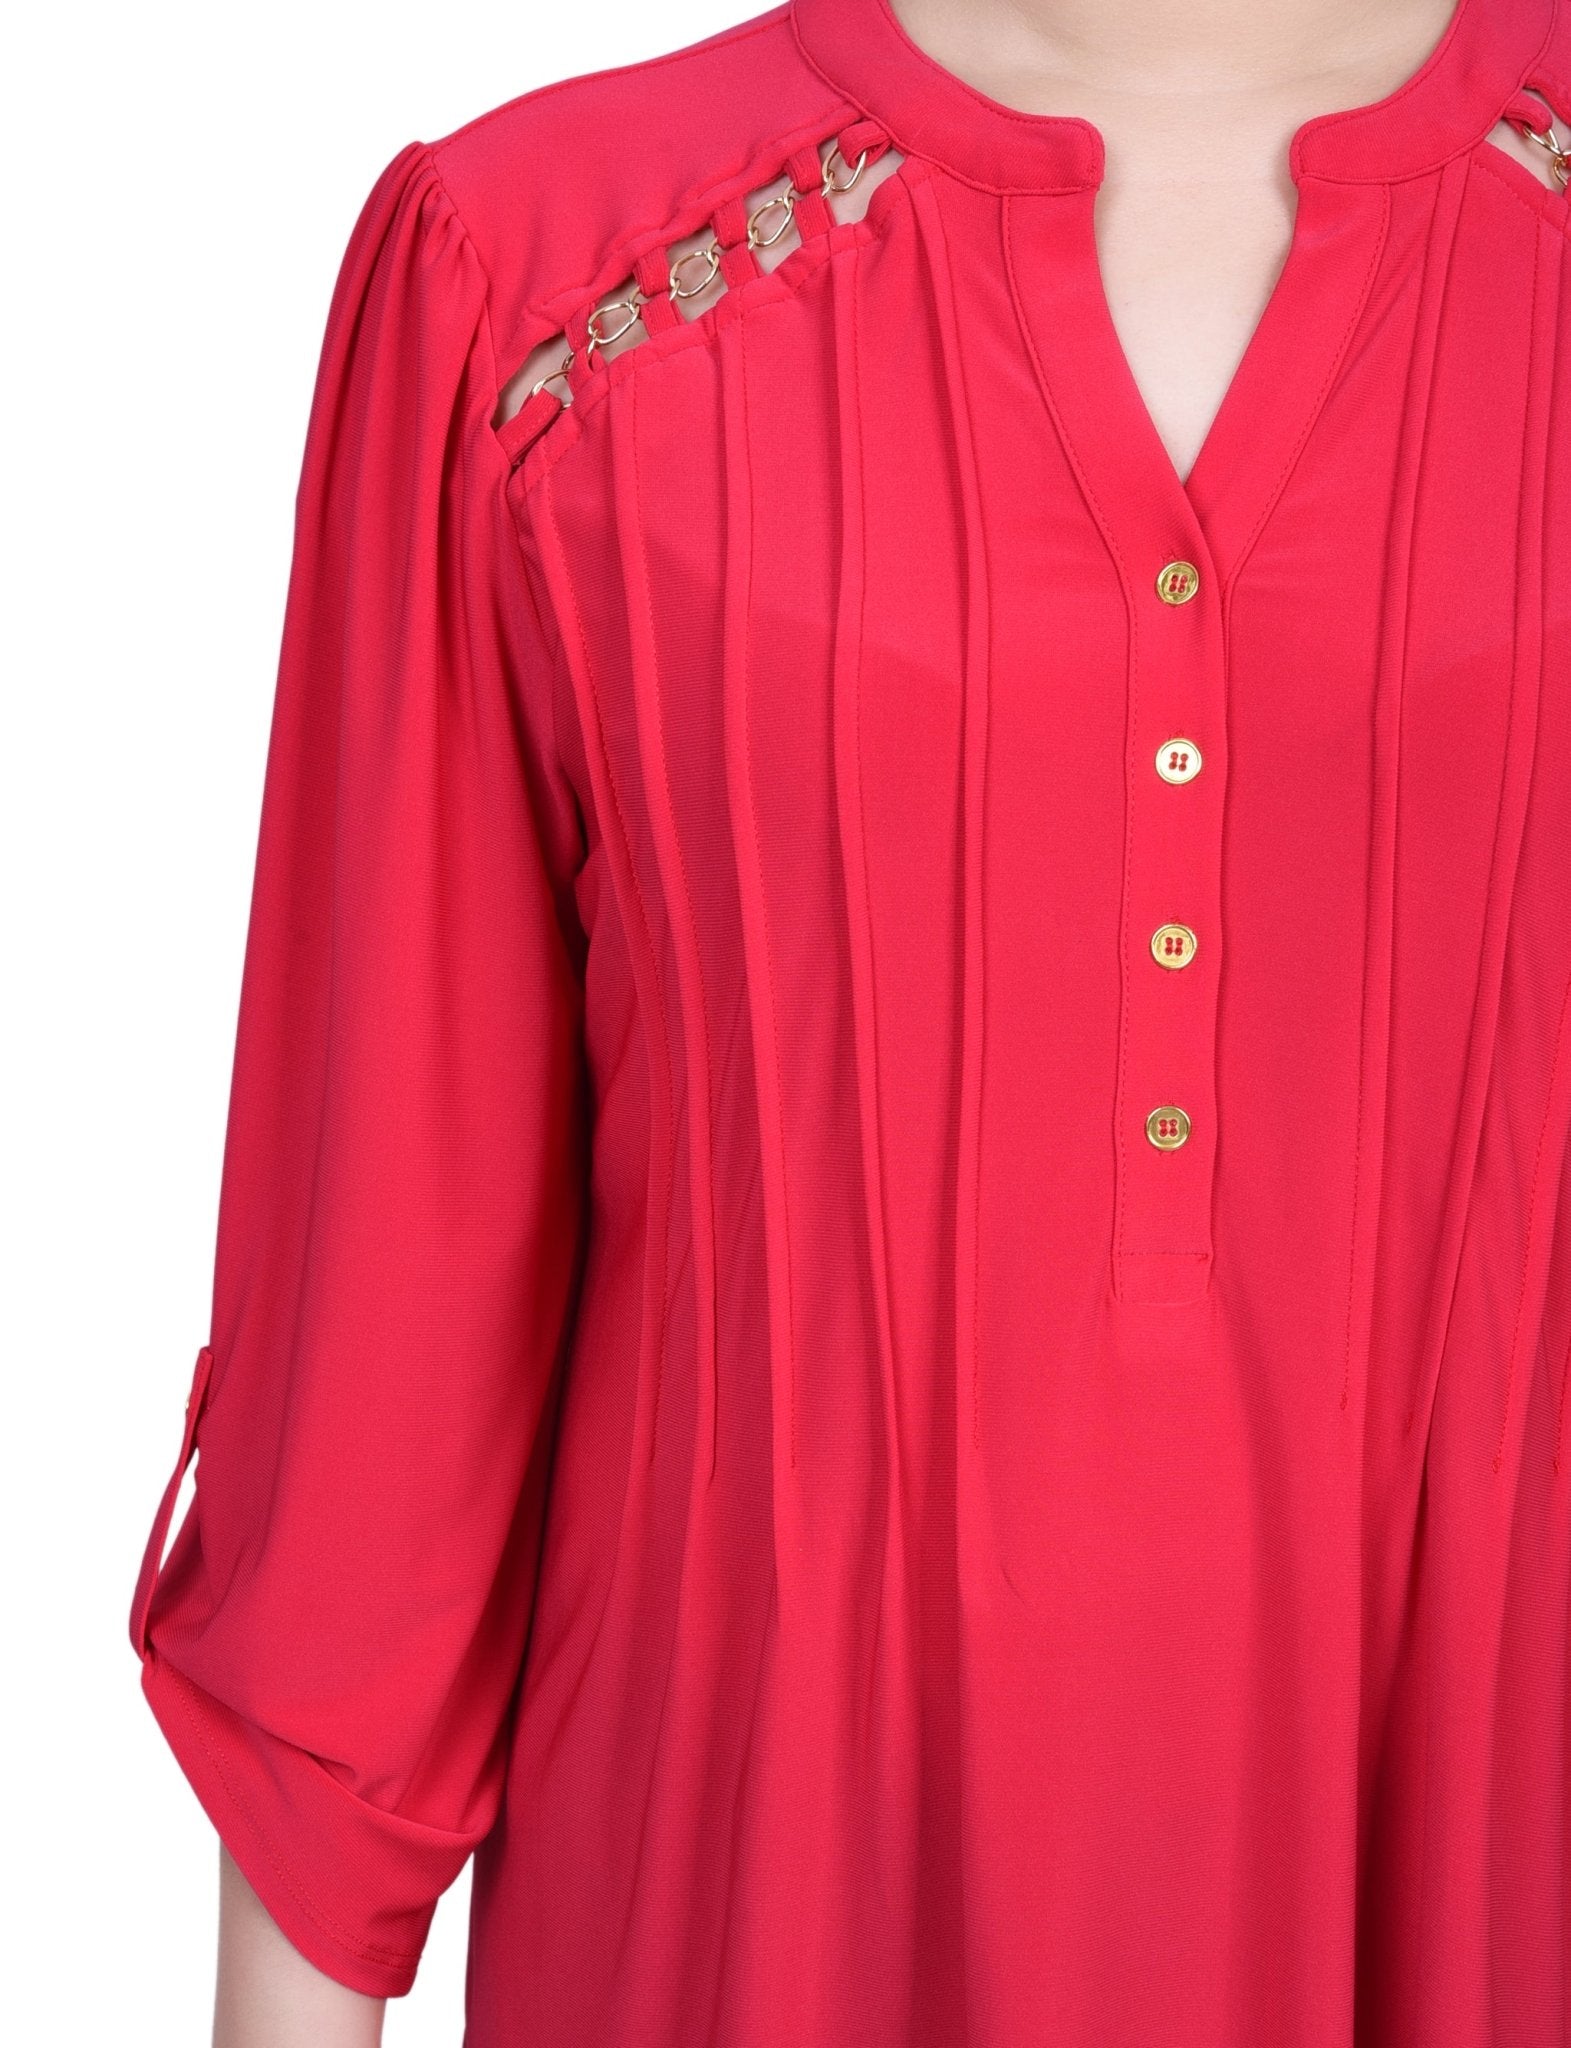 Pintuck Front Top With Chain Details - Petite - DressbarnShirts & Blouses